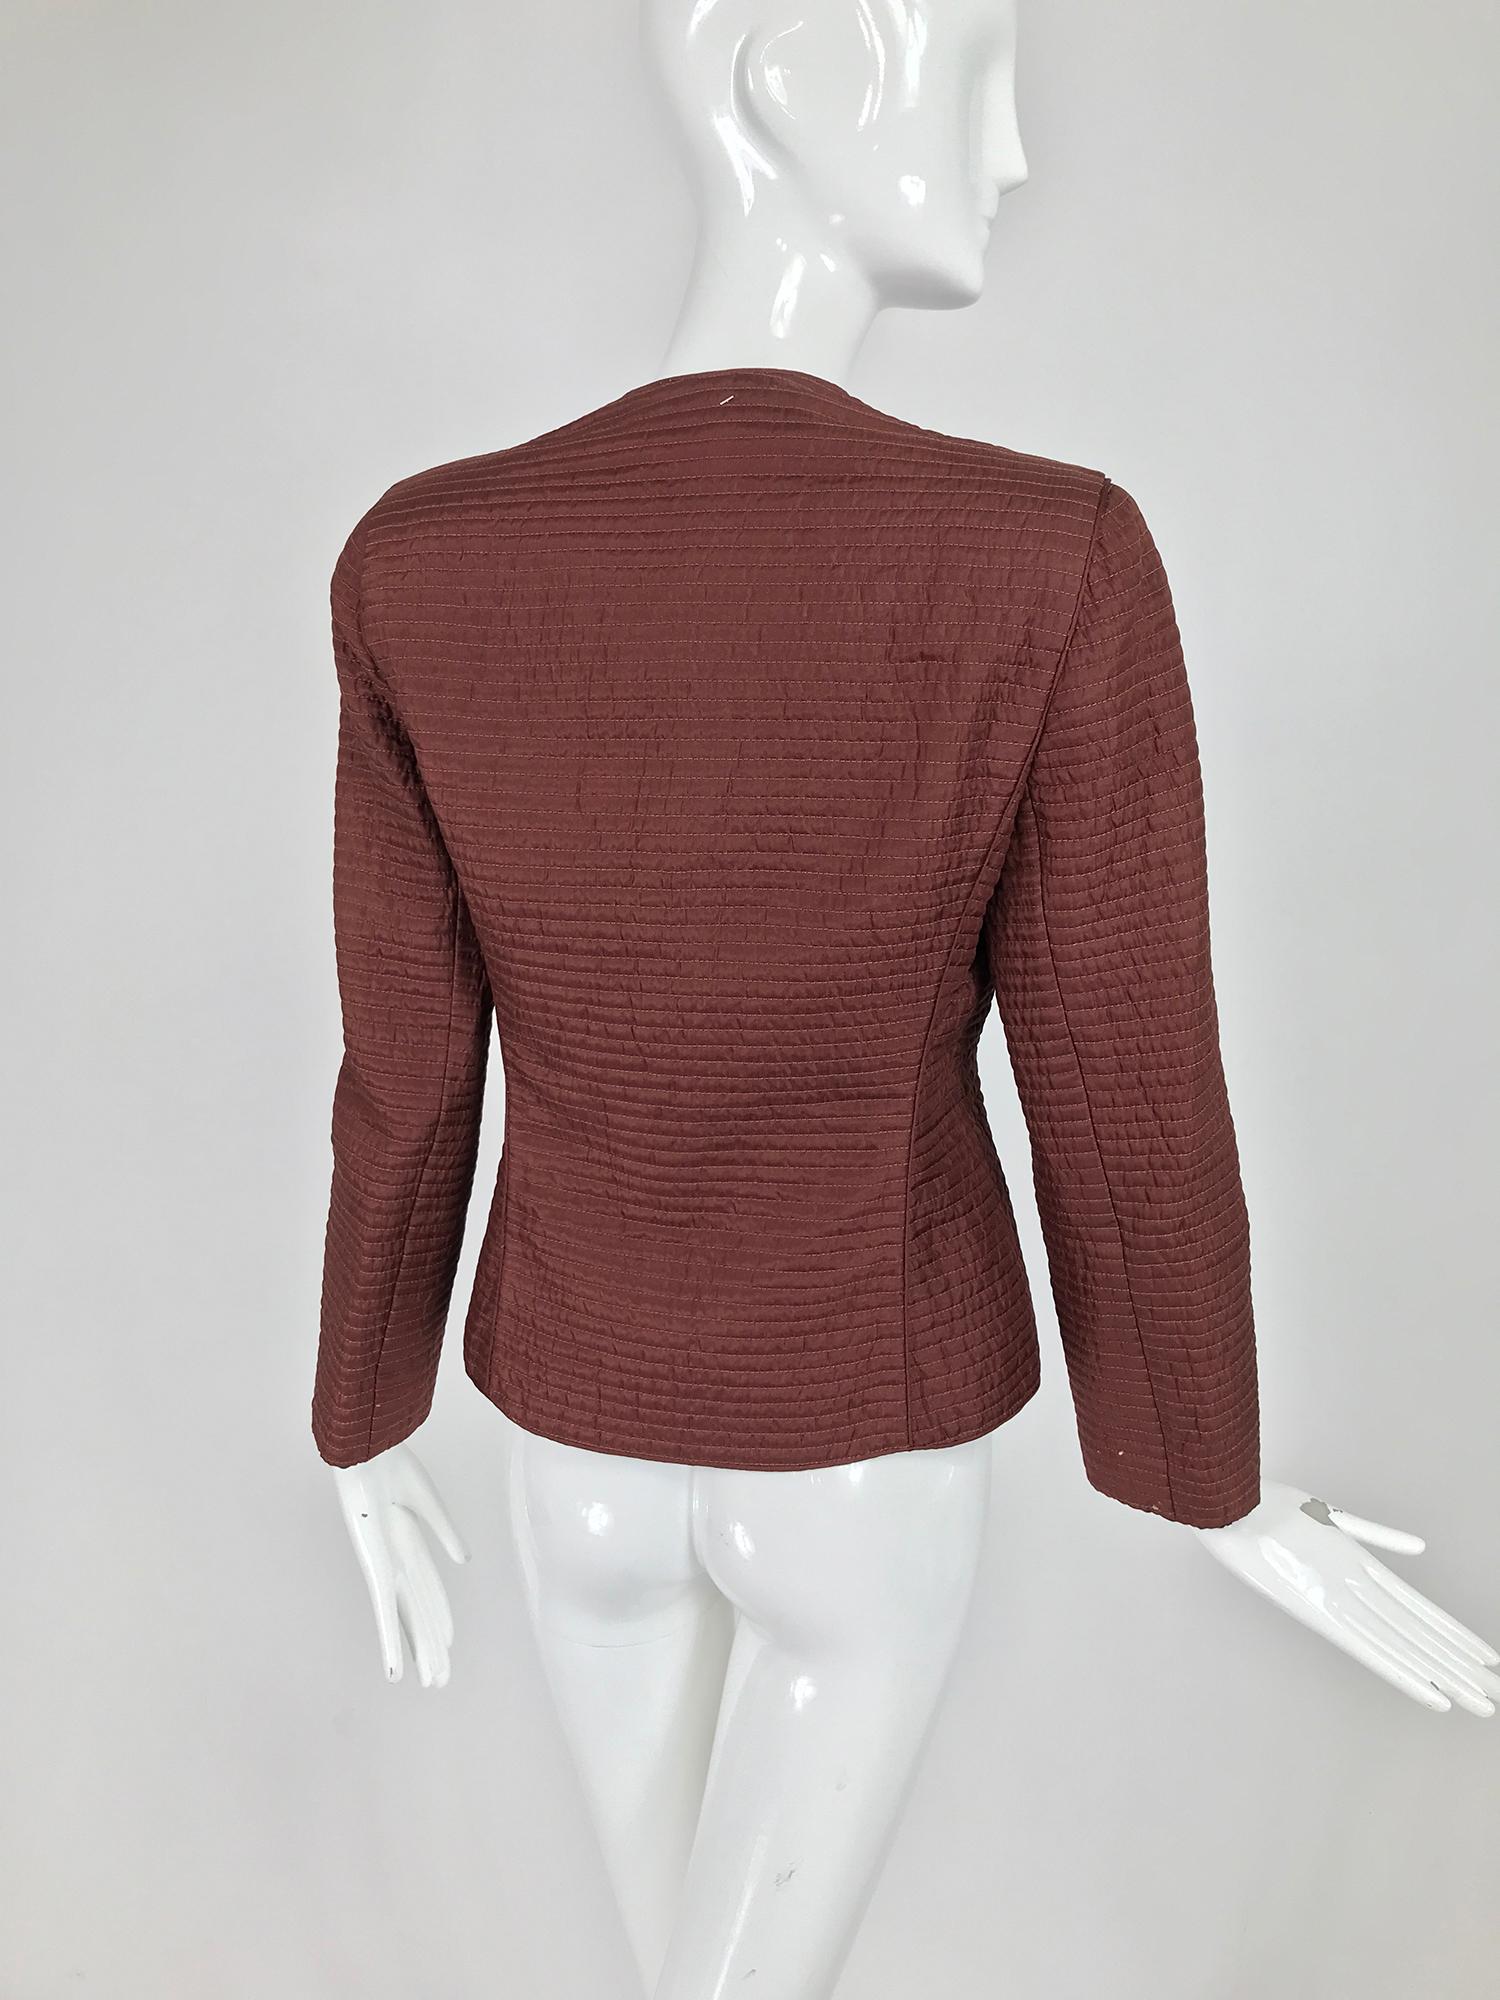 Mary McFadden Quilted Jacket in Rich Raisin Brown 1970s 2